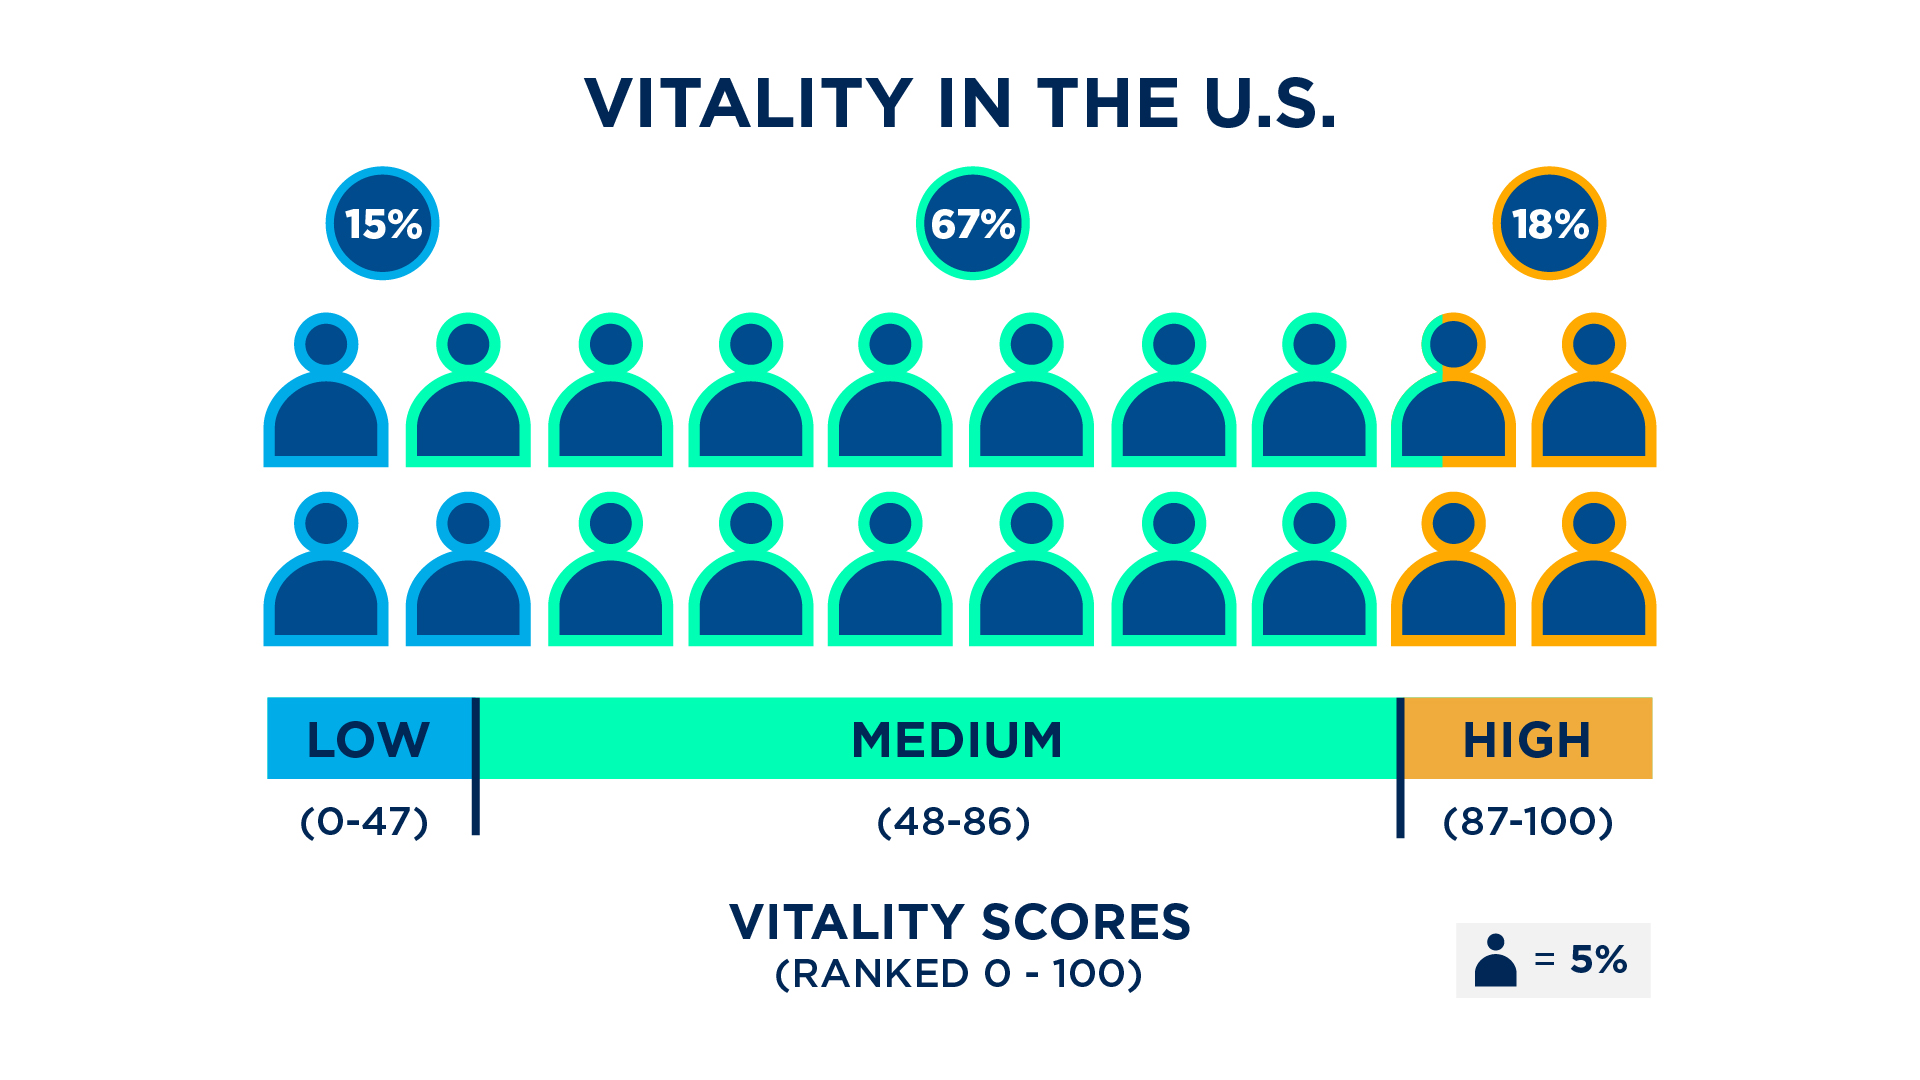 Among the general population, the average vitality score is 67.4 out of 100. 